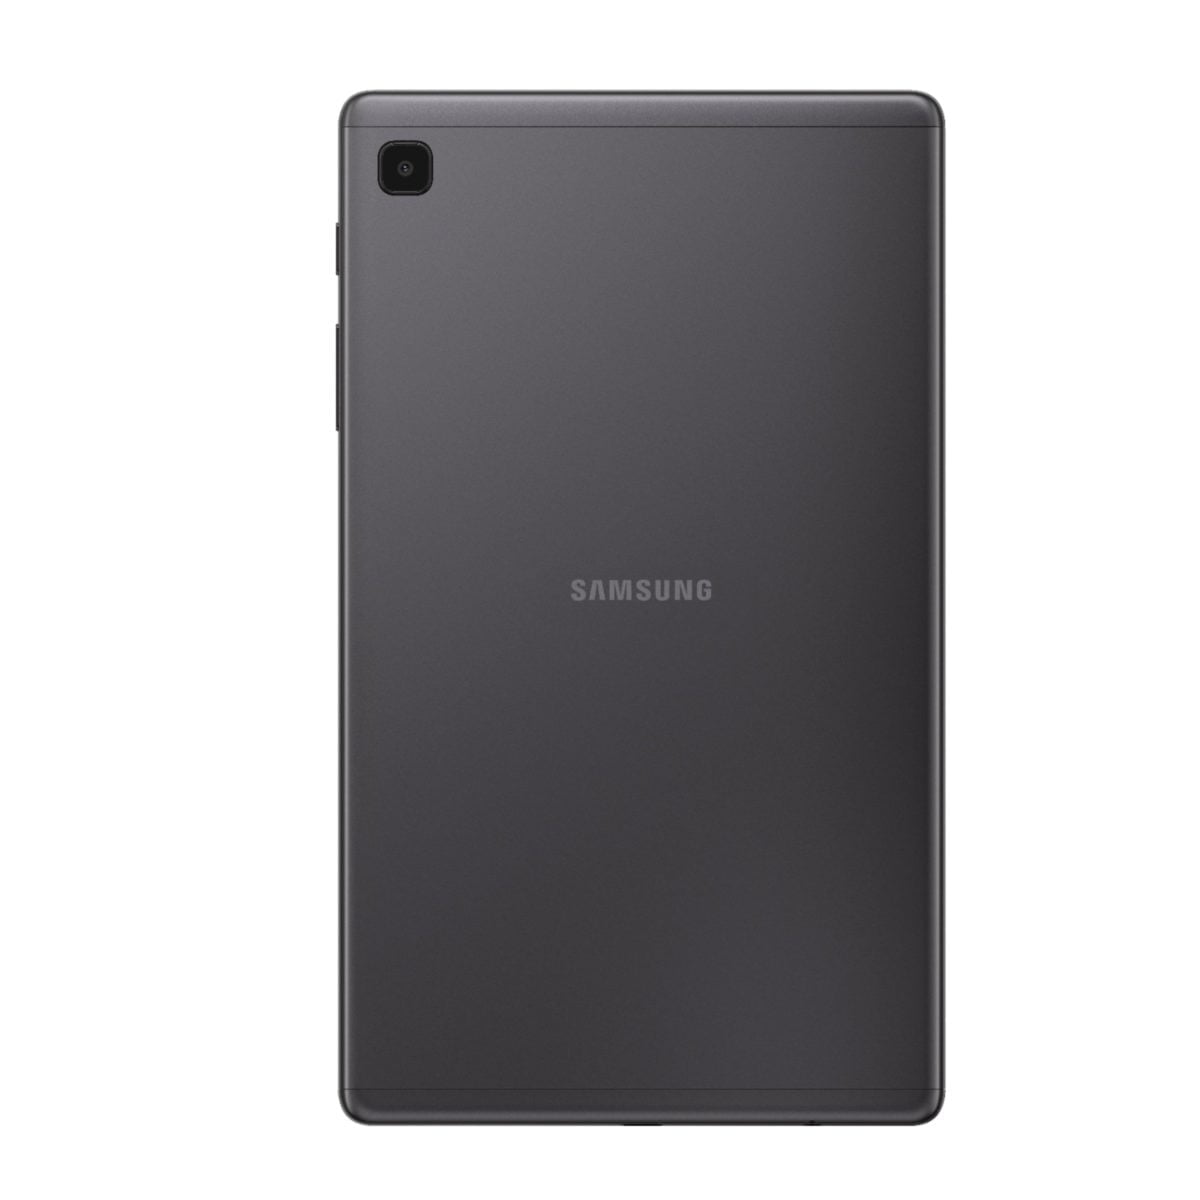 6464584Cv11D Scaled Samsung &Lt;H1&Gt;Samsung Galaxy Tab A7 Lite 32Gb - ‎Dark Gray&Lt;/H1&Gt; Meet The Device Your Whole Family Will Love: Samsung Galaxy Tab A7 Lite, The Tablet That'S Made To Be Shared. With Its Compact 8.7&Quot; Screen, Galaxy Tab A7 Lite Is Perfectly Sized For Entertainment On The Go. Its Sturdy Metal Frame Is Built To Be Brought Along From The Living Room To Your Beach Vacation, Or Wherever You Want To Take It. Galaxy Tab A7 Lite Comes With Access To Hours Of Ad-Free Youtube Premium And Samsung Tv At No Extra Charge So You Can Keep The Family Happy Without Annoying Interruptions. Plus, With A Powerful Processor For Fast Streaming And Plenty Of Storage For Your Favorite Files, Galaxy Tab A7 Lite Simplifies Entertainment Needs For Everyone Under Your Roof. Samsung Galaxy Tab Samsung Galaxy Tab A7 Lite 32Gb Cellular - ‎Dark Gray